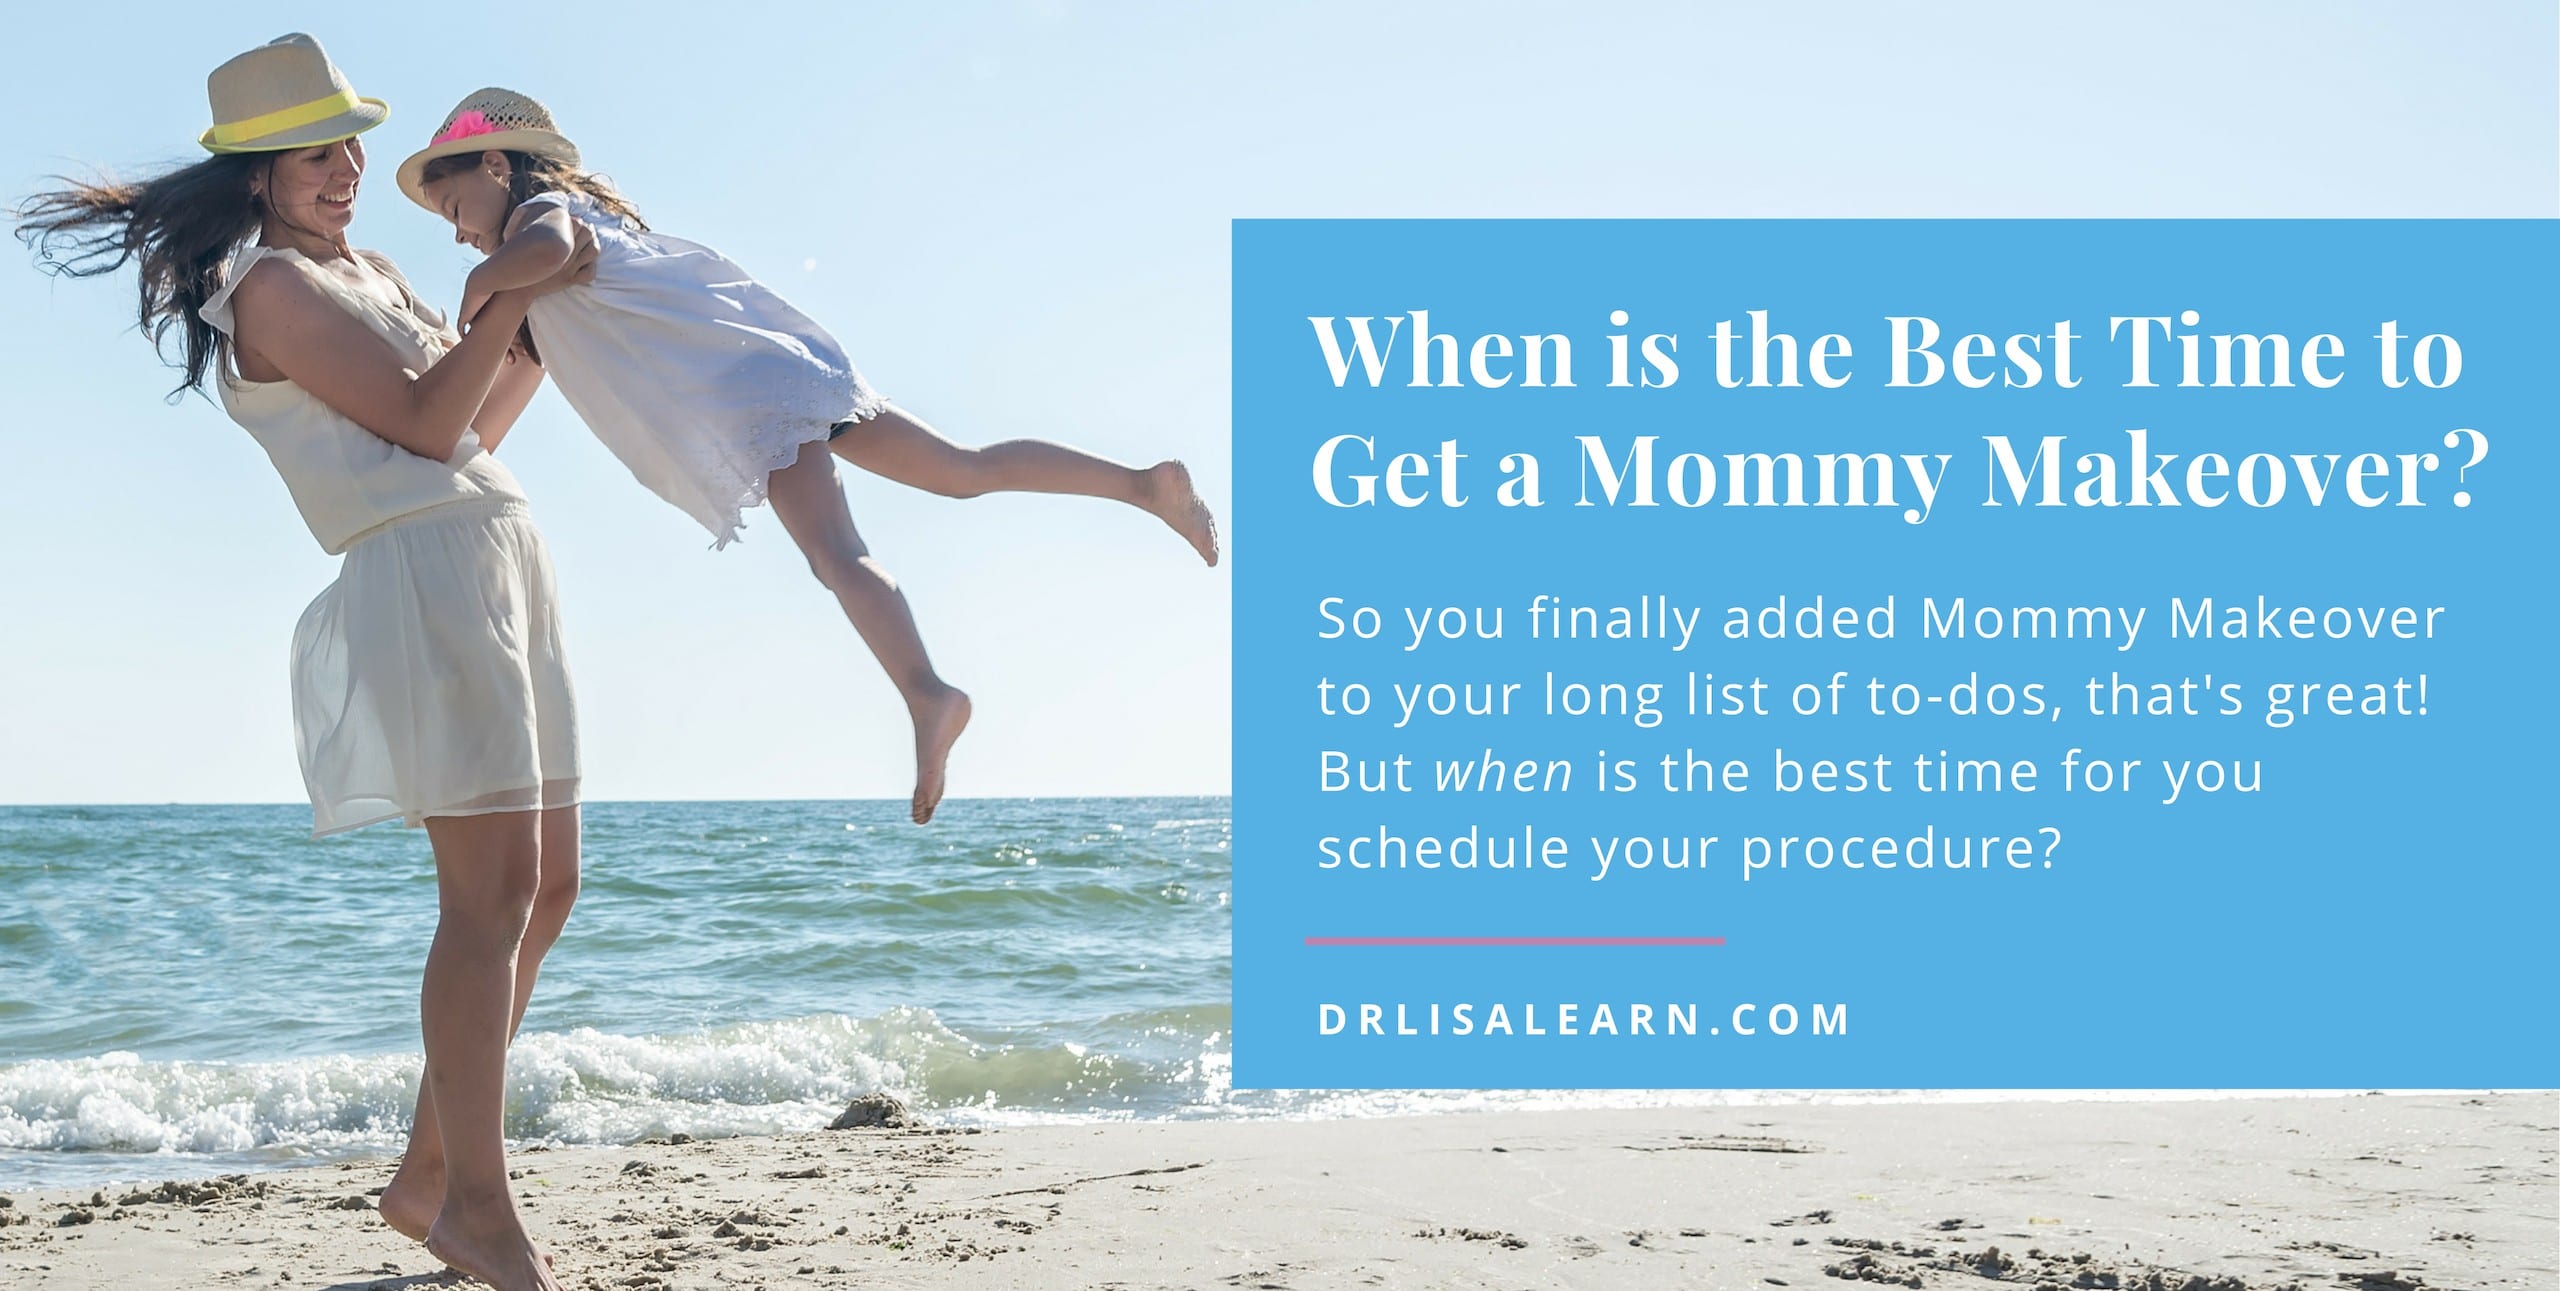 Dr. Learn - Mommy Makeover